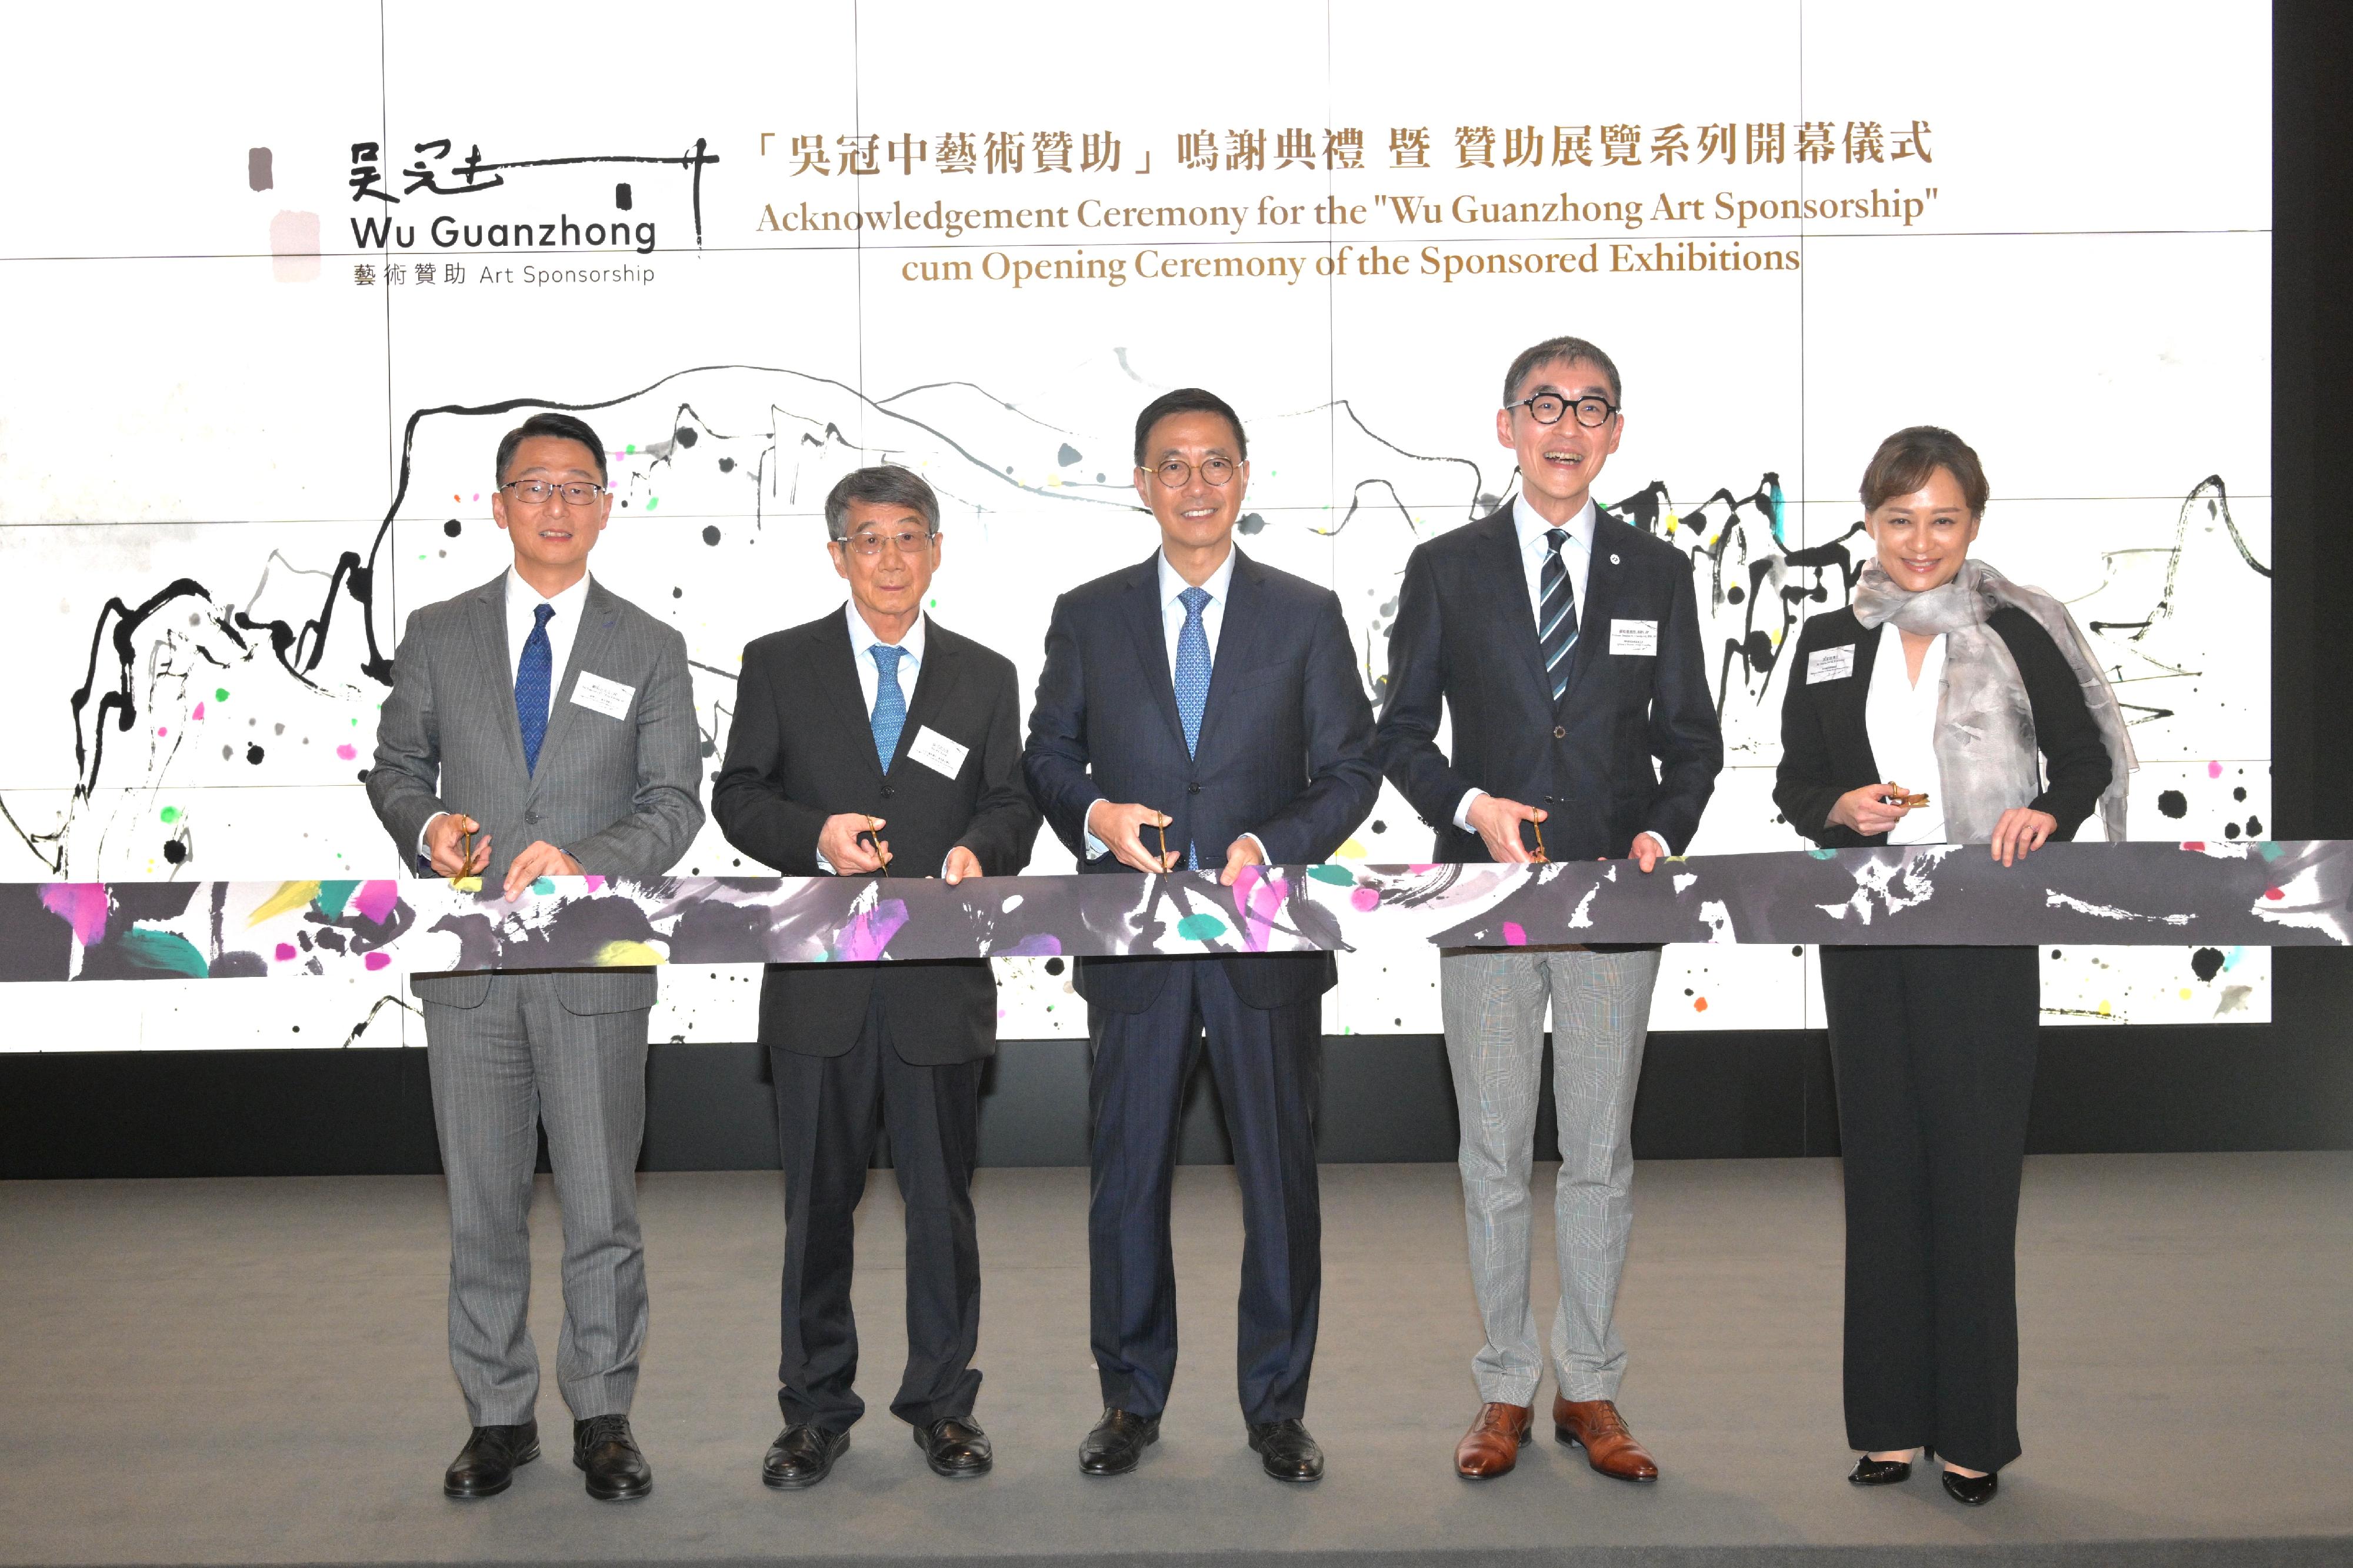 The acknowledgement ceremony for the Wu Guanzhong Art Sponsorship and opening ceremony of sponsored exhibitions was held today (March 21) at the Hong Kong Museum of Art (HKMoA). Picture shows (from left) officiating guests including the Director of Leisure and Cultural Services, Mr Vincent Liu; sponsor of the Wu Guanzhong Art Sponsorship, Mr Wu Keyu; the Secretary for Culture, Sports and Tourism, Mr Kevin Yeung; the Chairman of the Museum Advisory Committee, Professor Douglas So; and the Museum Director of the HKMoA, Dr Maria Mok, during the ribbon cutting ceremony.